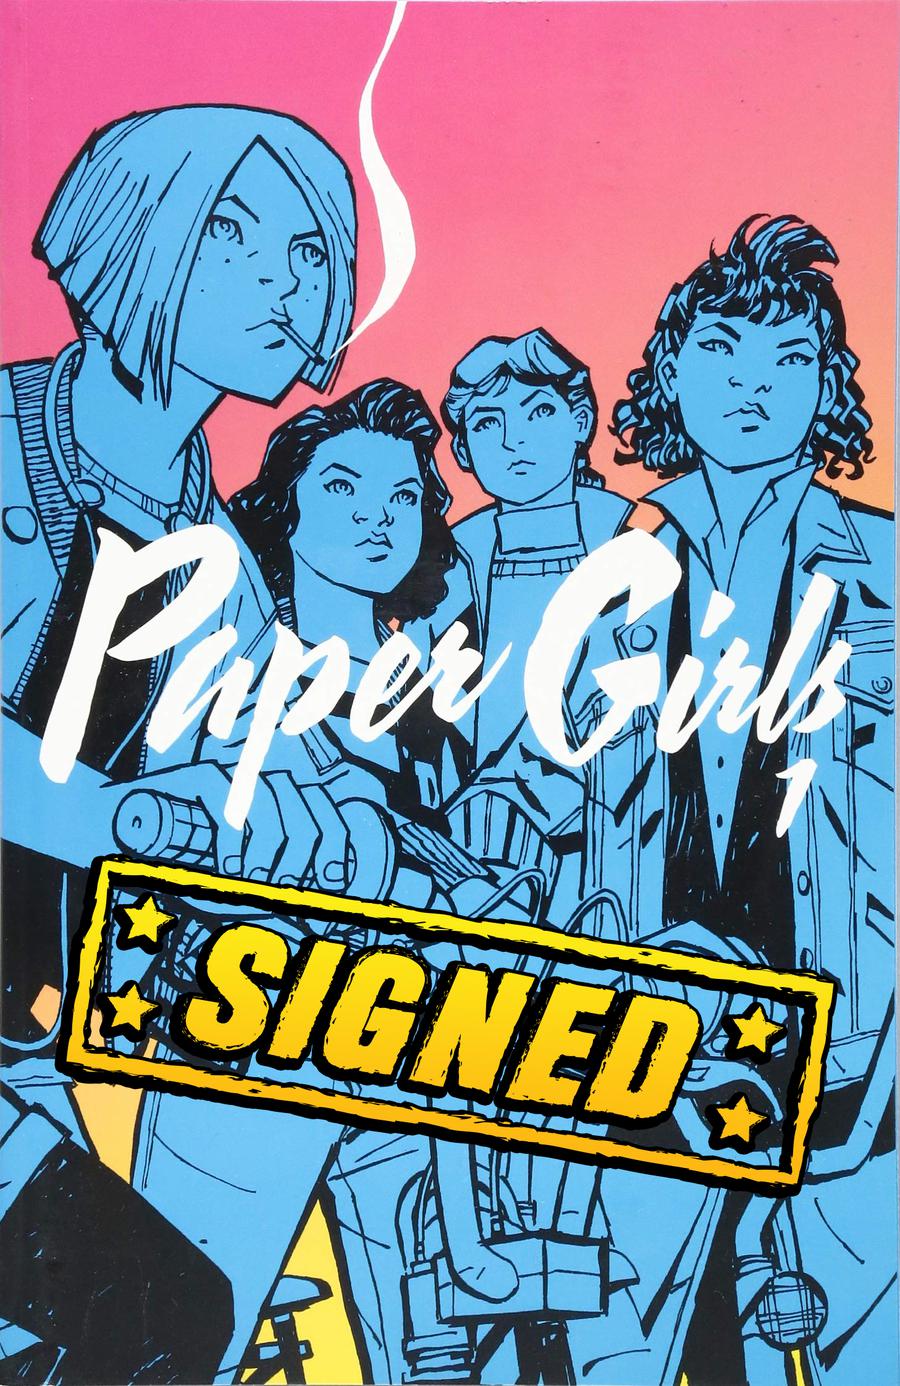 Paper Girls Vol 1 TP Signed By Brian K Vaughan & Cliff Chiang